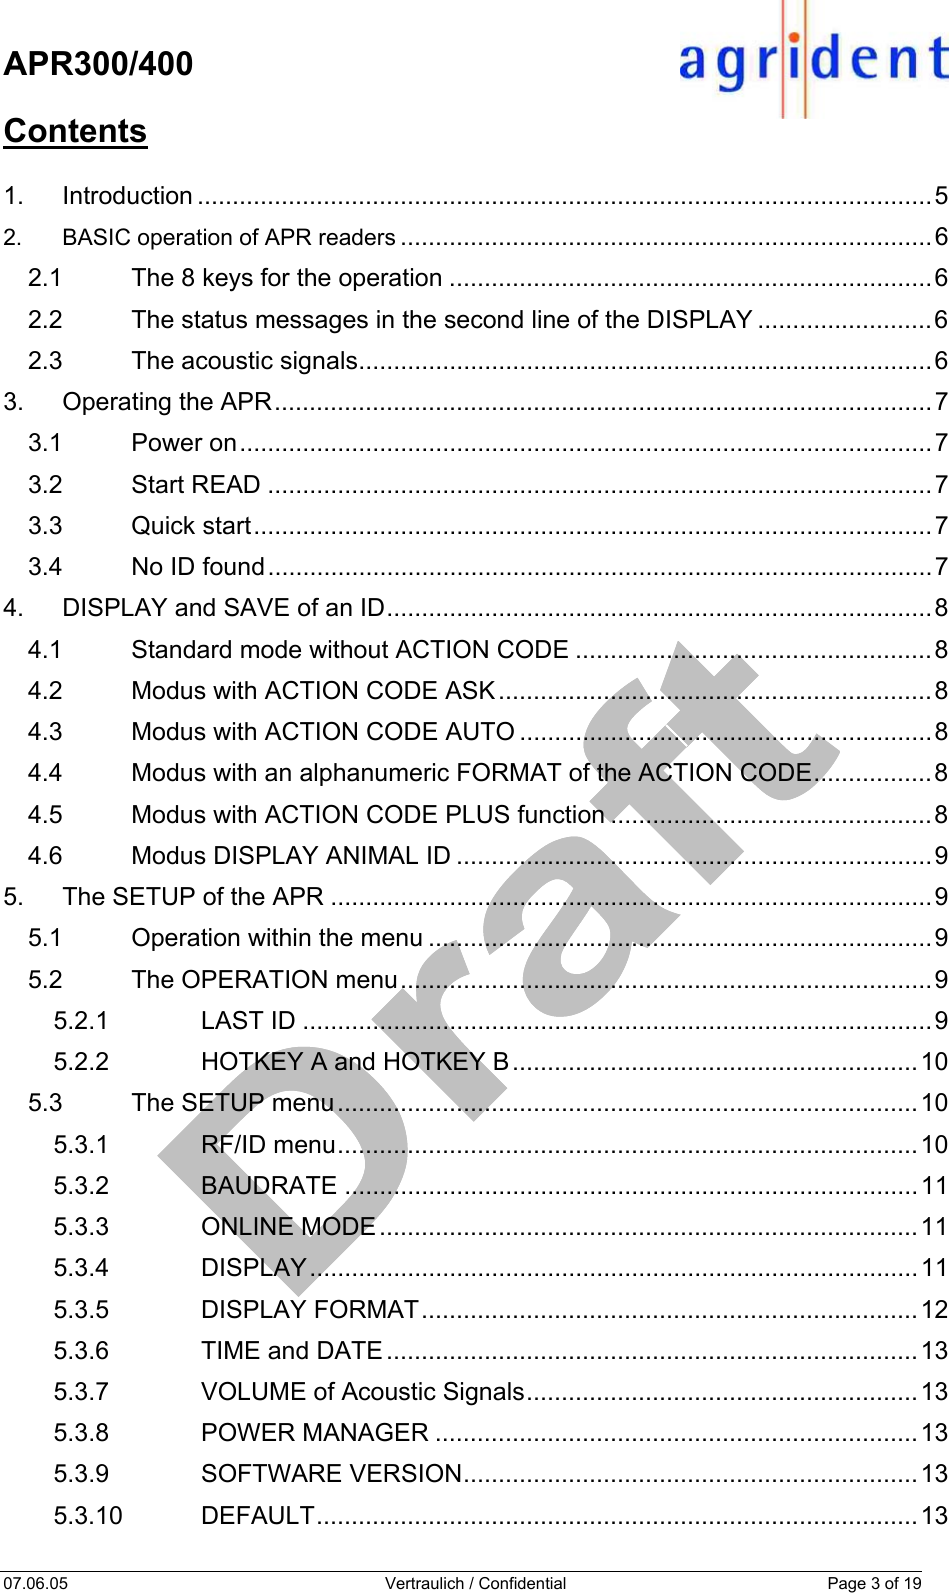    APR300/400  07.06.05  Vertraulich / Confidential  Page 3 of 19  Contents  1. Introduction .........................................................................................................5 2. BASIC operation of APR readers ............................................................................6 2.1 The 8 keys for the operation .....................................................................6 2.2 The status messages in the second line of the DISPLAY .........................6 2.3 The acoustic signals..................................................................................6 3. Operating the APR..............................................................................................7 3.1 Power on...................................................................................................7 3.2 Start READ ...............................................................................................7 3.3 Quick start.................................................................................................7 3.4 No ID found...............................................................................................7 4. DISPLAY and SAVE of an ID..............................................................................8 4.1 Standard mode without ACTION CODE ...................................................8 4.2 Modus with ACTION CODE ASK..............................................................8 4.3 Modus with ACTION CODE AUTO ...........................................................8 4.4 Modus with an alphanumeric FORMAT of the ACTION CODE.................8 4.5 Modus with ACTION CODE PLUS function ..............................................8 4.6 Modus DISPLAY ANIMAL ID ....................................................................9 5. The SETUP of the APR ......................................................................................9 5.1 Operation within the menu ........................................................................9 5.2 The OPERATION menu............................................................................9 5.2.1 LAST ID ..........................................................................................9 5.2.2 HOTKEY A and HOTKEY B..........................................................10 5.3 The SETUP menu...................................................................................10 5.3.1 RF/ID menu...................................................................................10 5.3.2 BAUDRATE ..................................................................................11 5.3.3 ONLINE MODE.............................................................................11 5.3.4 DISPLAY.......................................................................................11 5.3.5 DISPLAY FORMAT.......................................................................12 5.3.6 TIME and DATE............................................................................13 5.3.7 VOLUME of Acoustic Signals........................................................13 5.3.8 POWER MANAGER .....................................................................13 5.3.9 SOFTWARE VERSION.................................................................13 5.3.10 DEFAULT......................................................................................13 